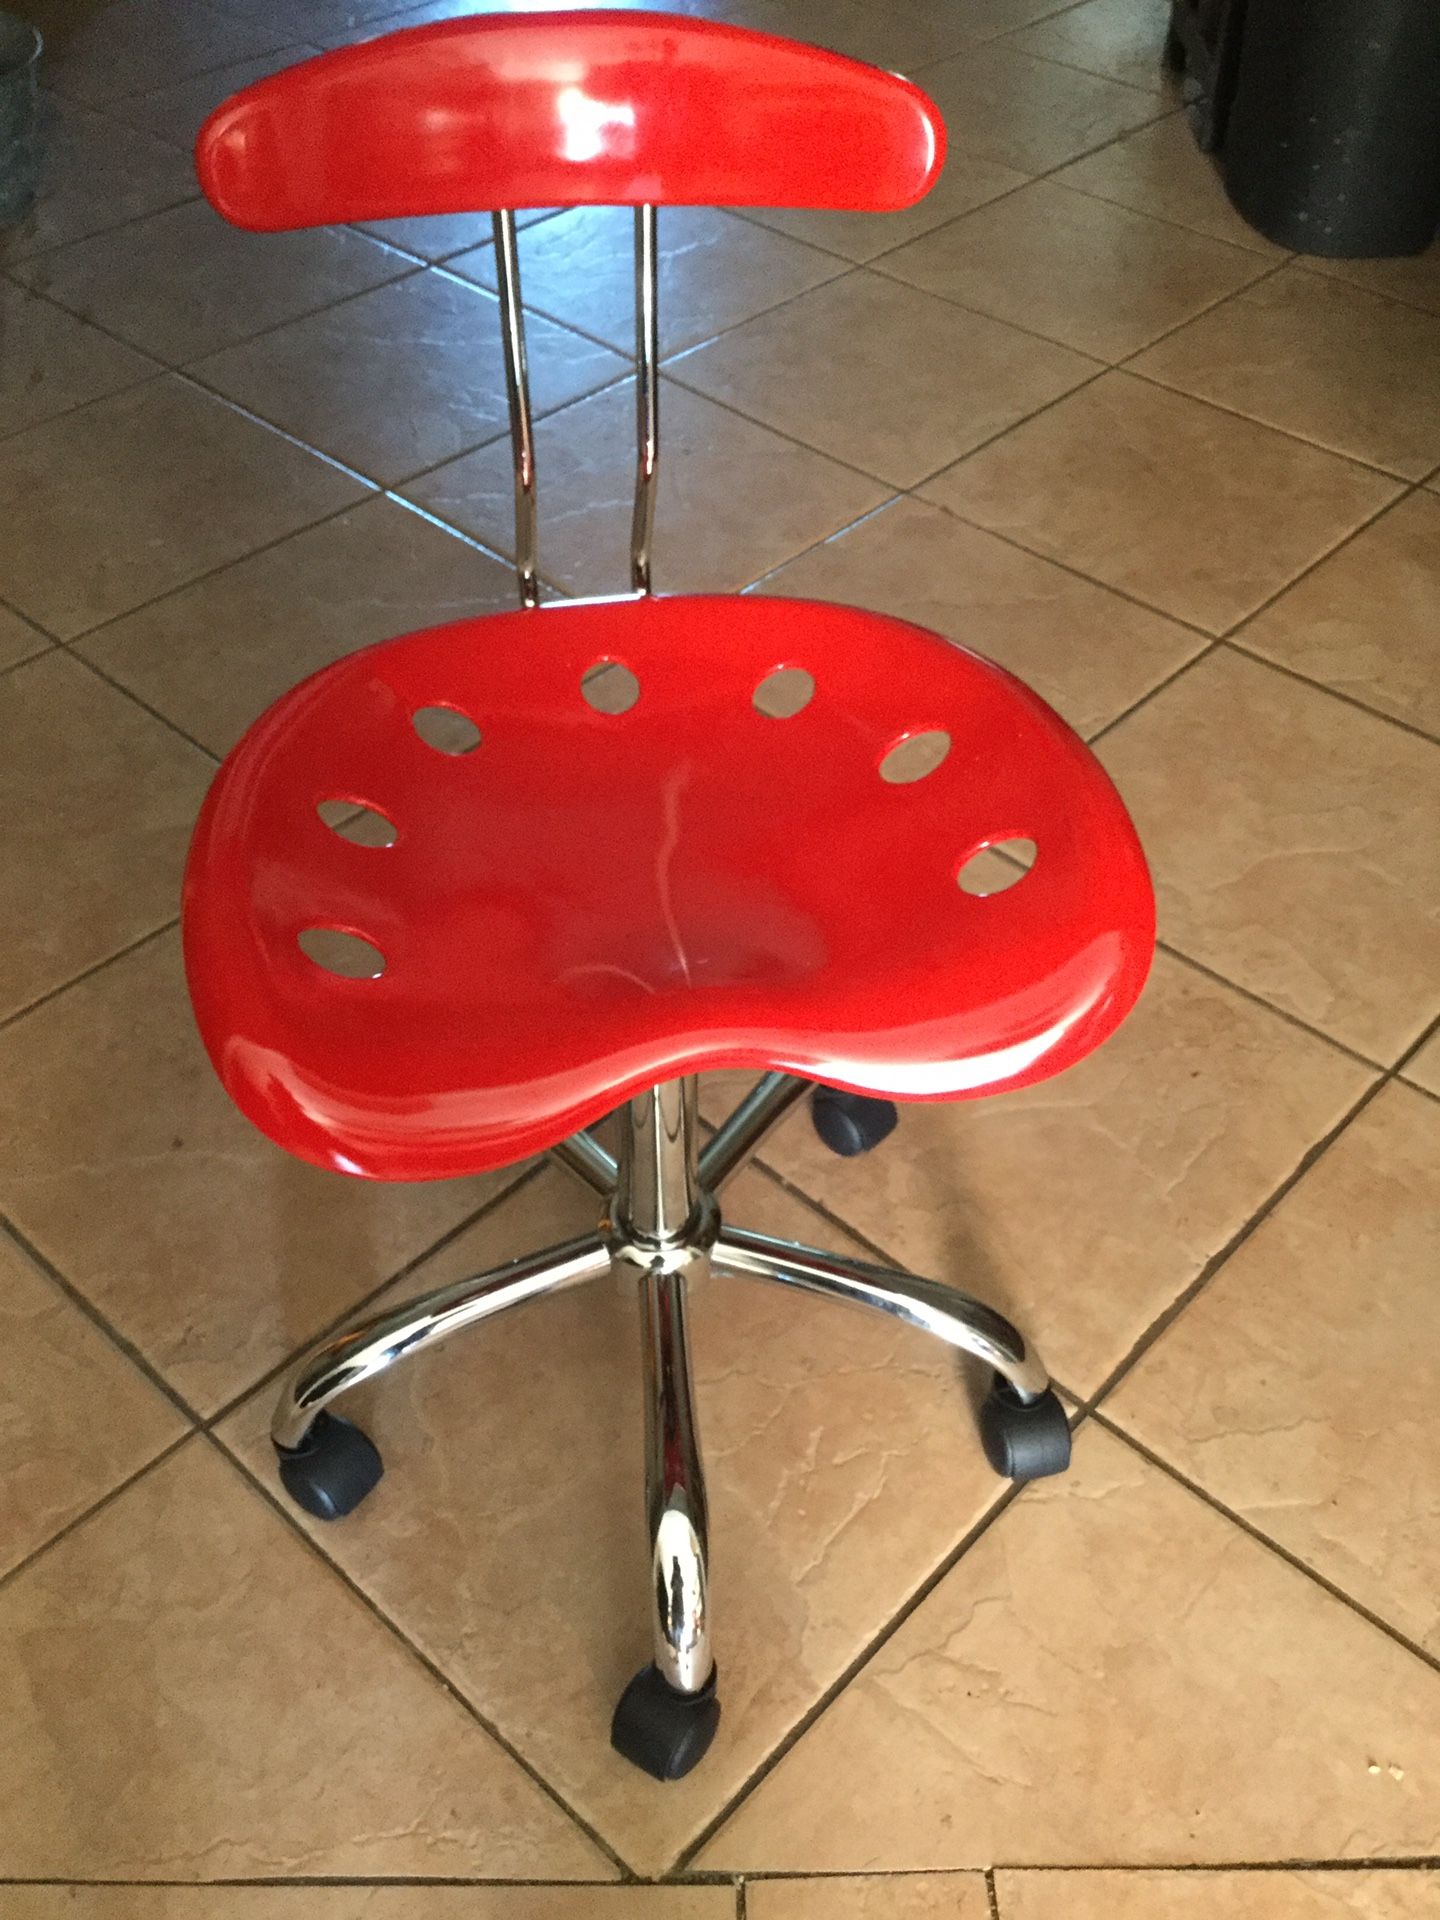 Red Tractor Air Adjustable Seat(New)